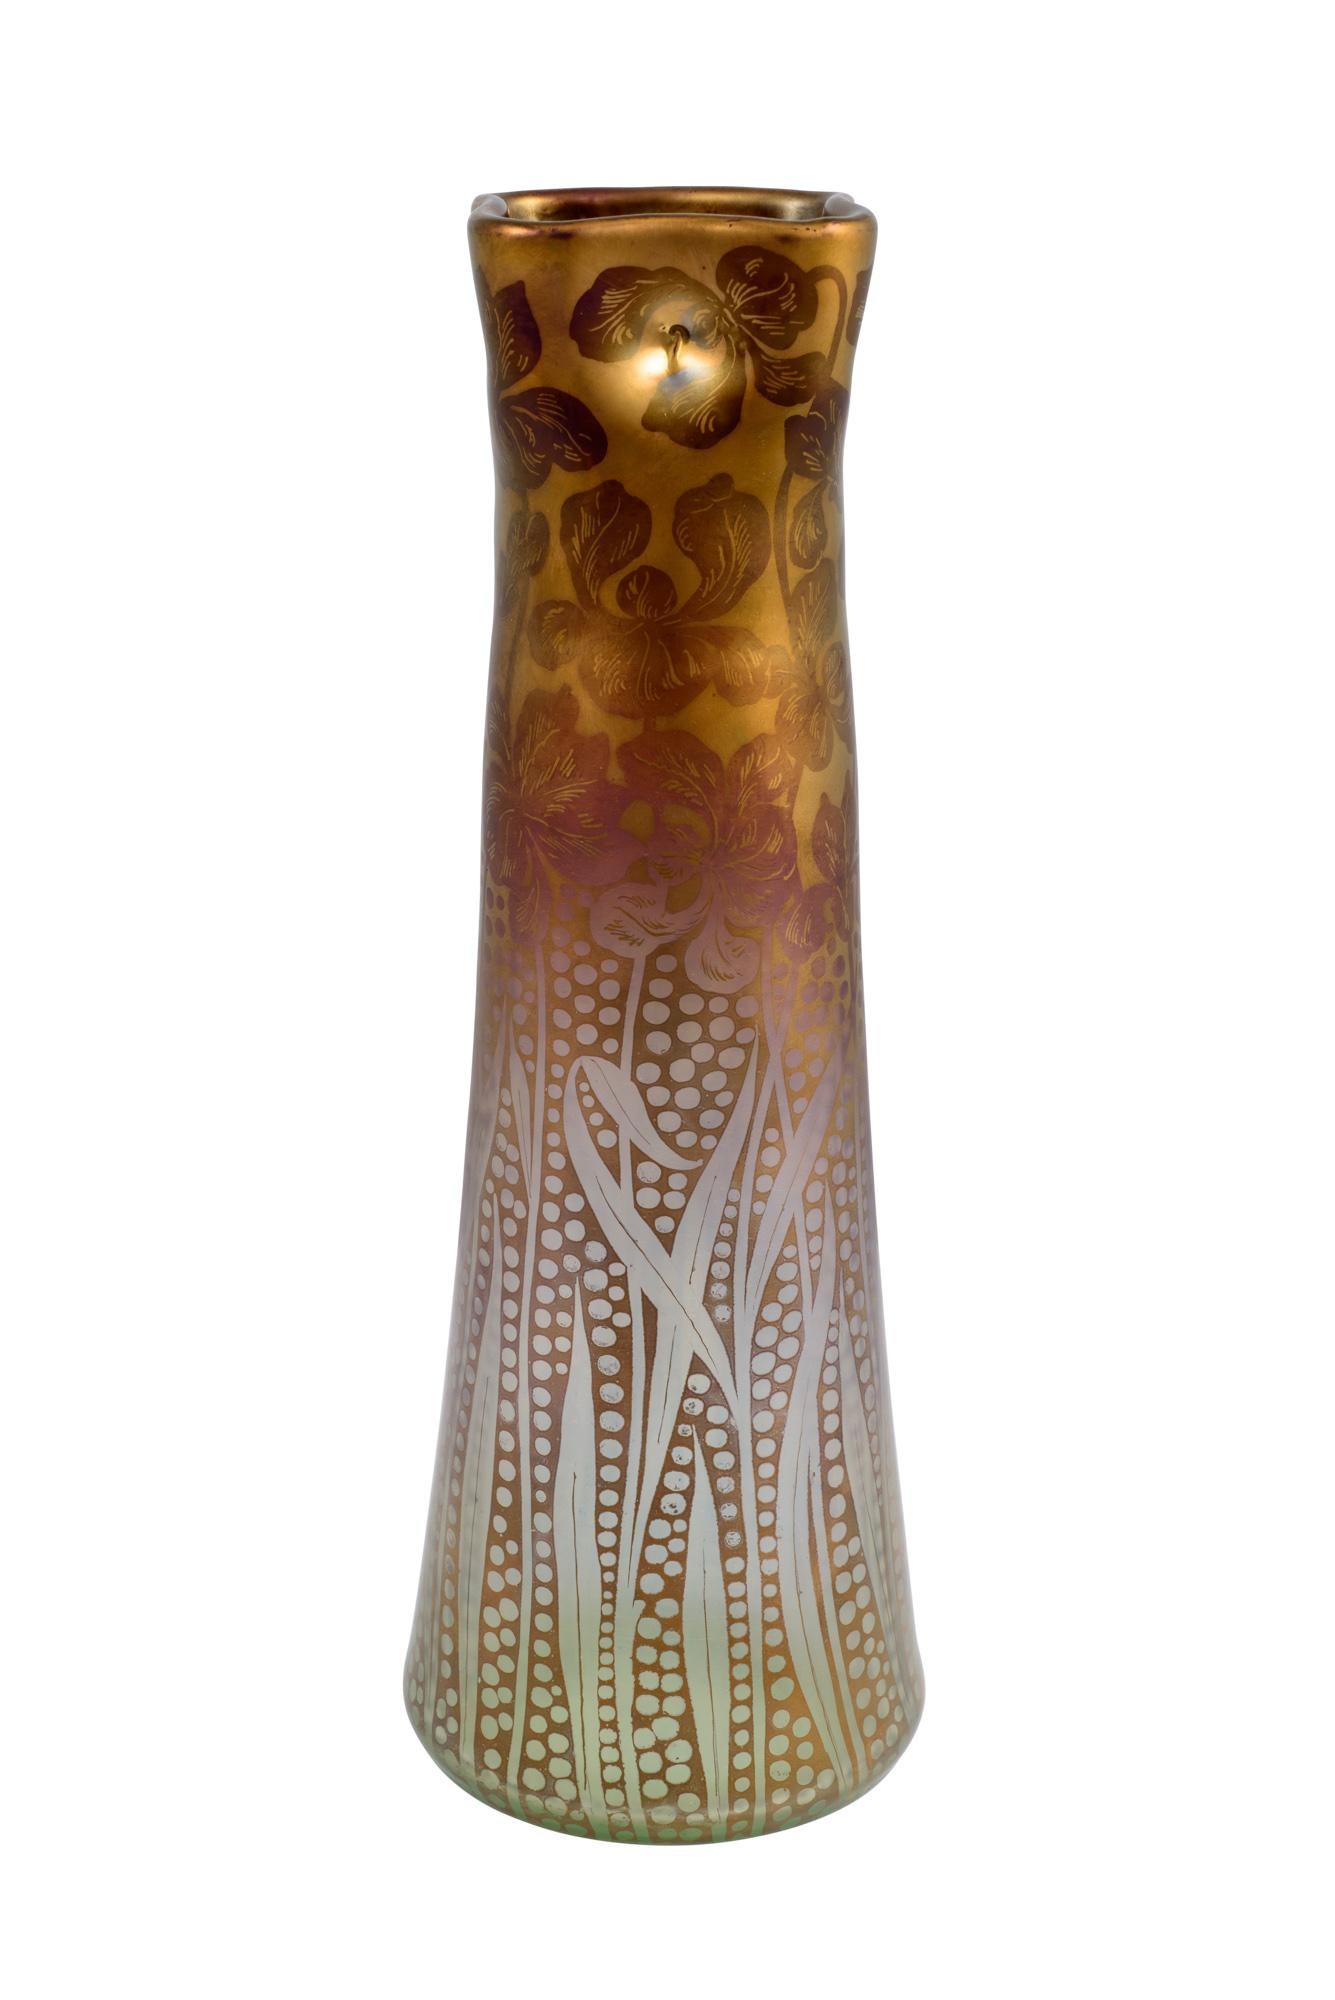 In the period around 1900, the Loetz Glass manufactory repeatedly surprised its customers with new ideas. Around 1900 Loetz experimented with the use of gold and etching ink. On the golden surface of the vases, floral Jugendstil ornaments were